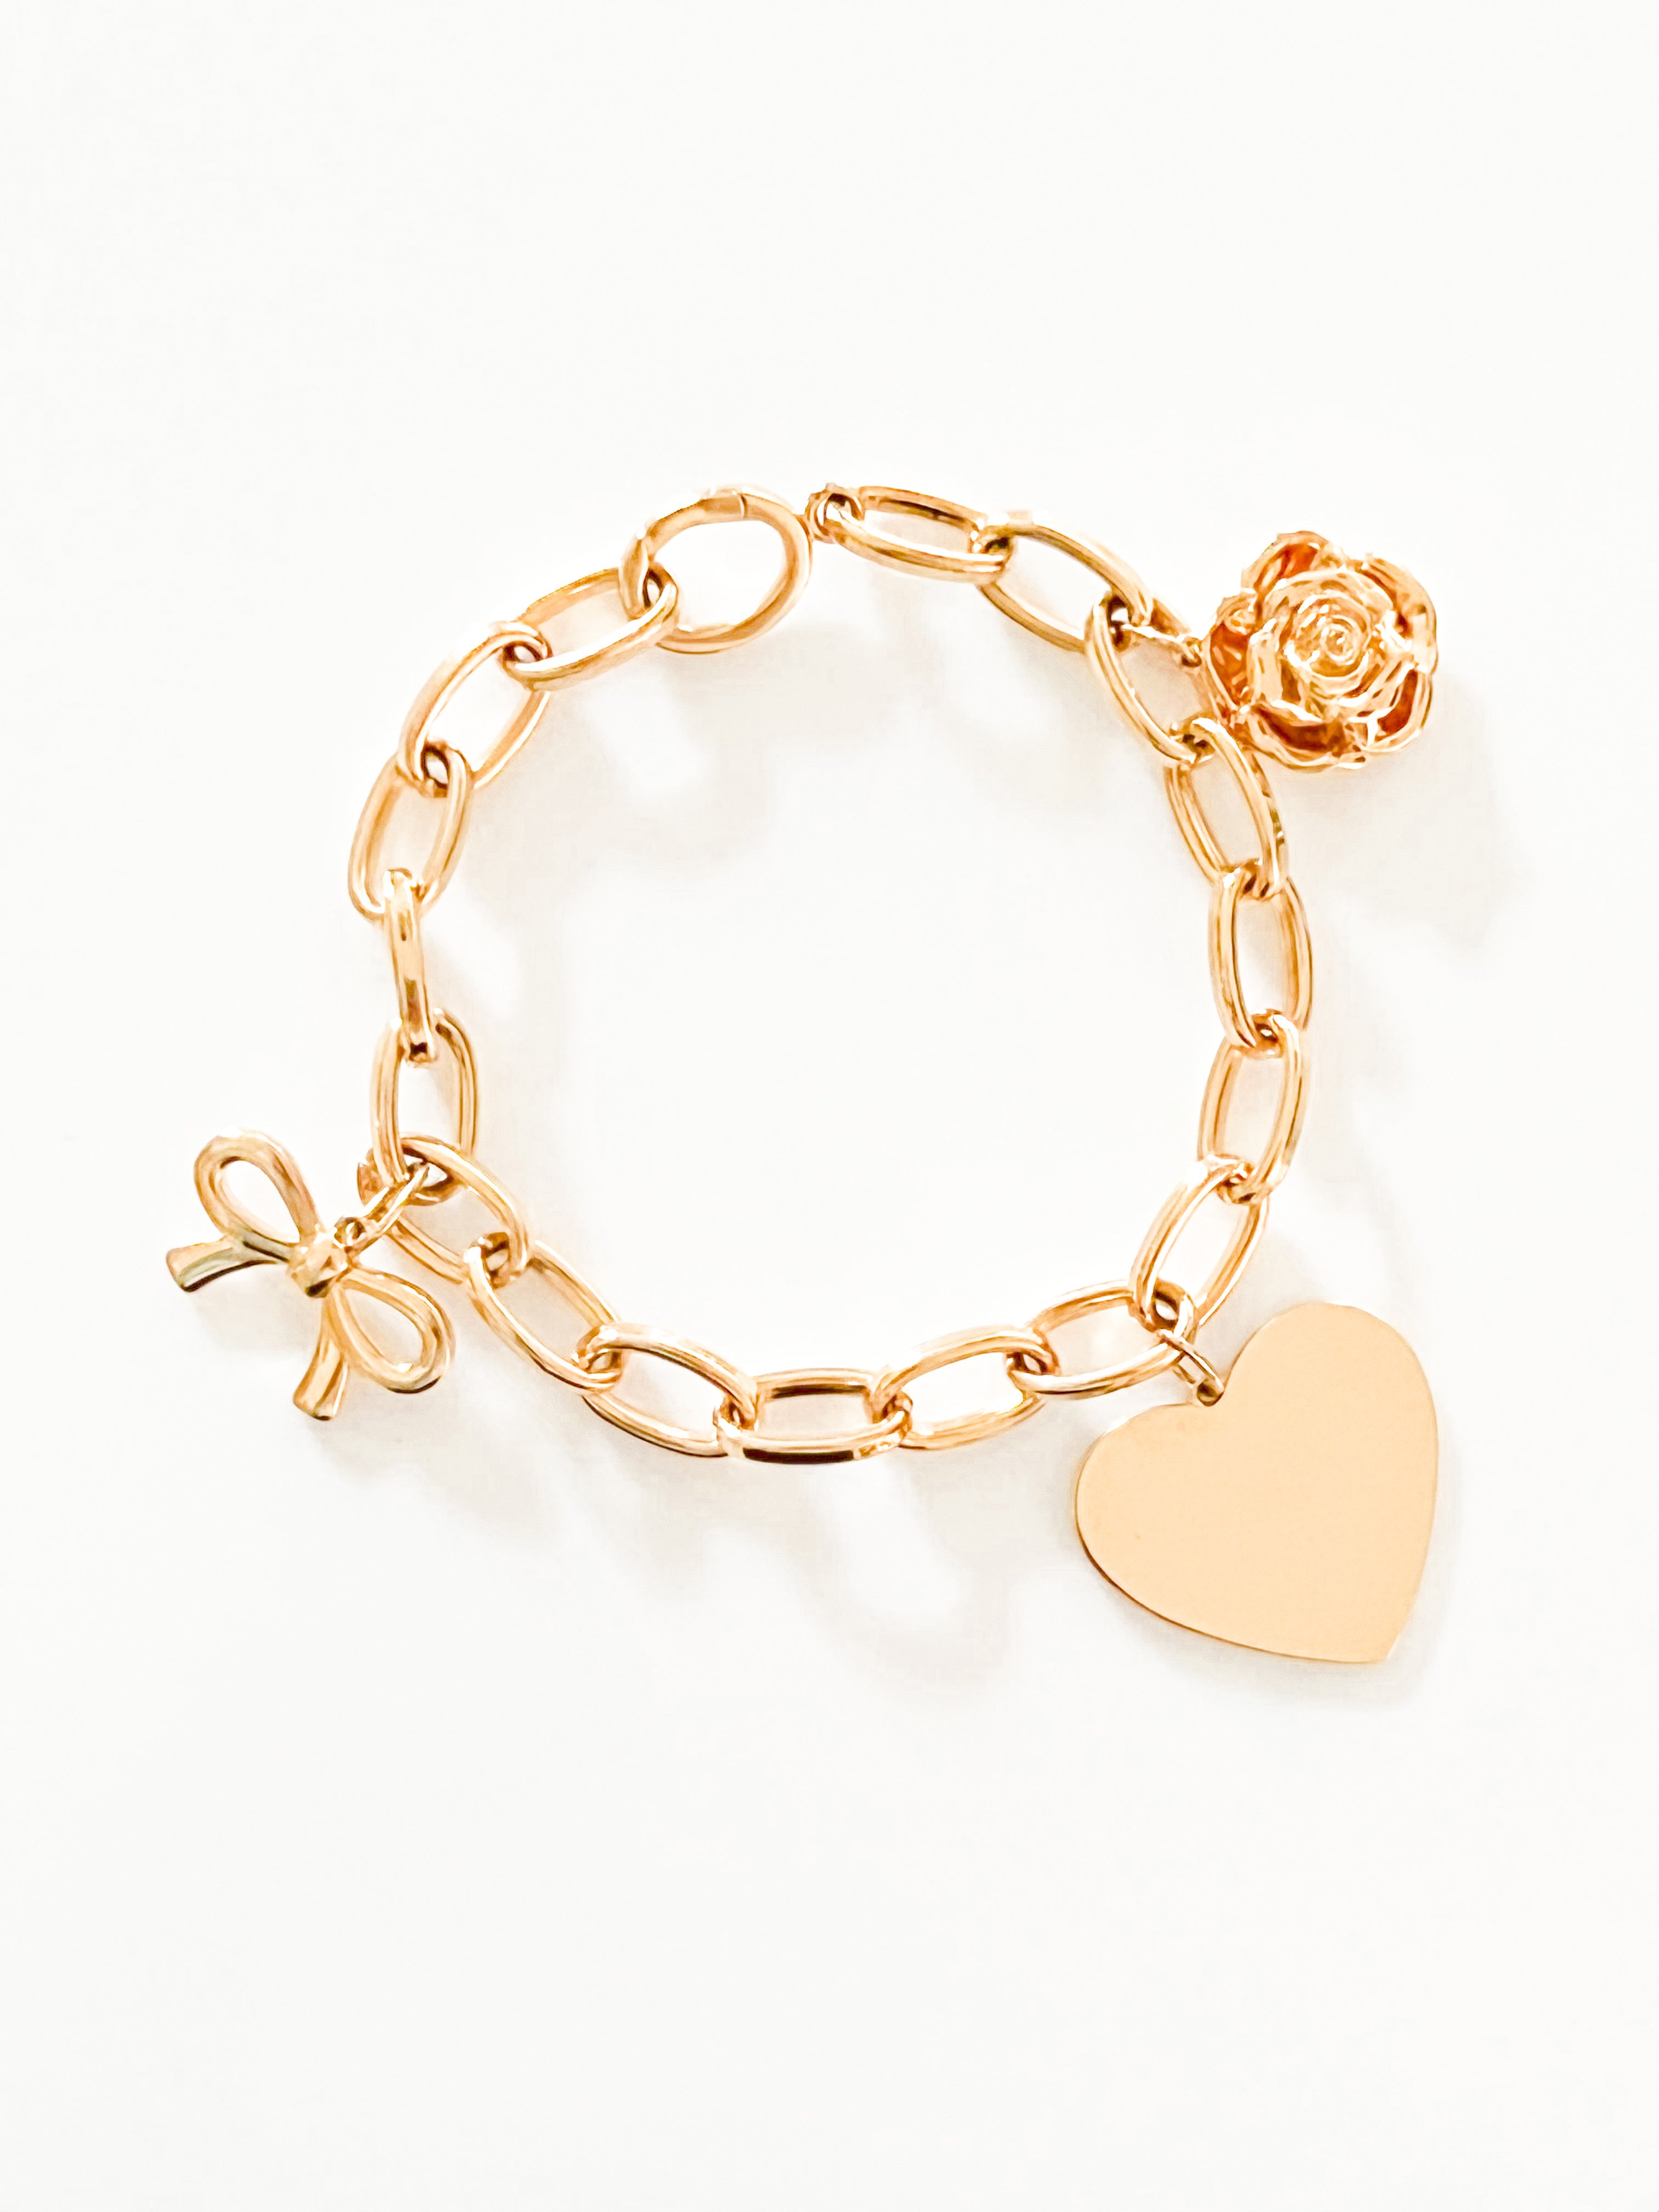 Backorder) (Stainless Steel) Personalized Amelia Heart Charm Bracelet in  Rose Gold | Arva.co